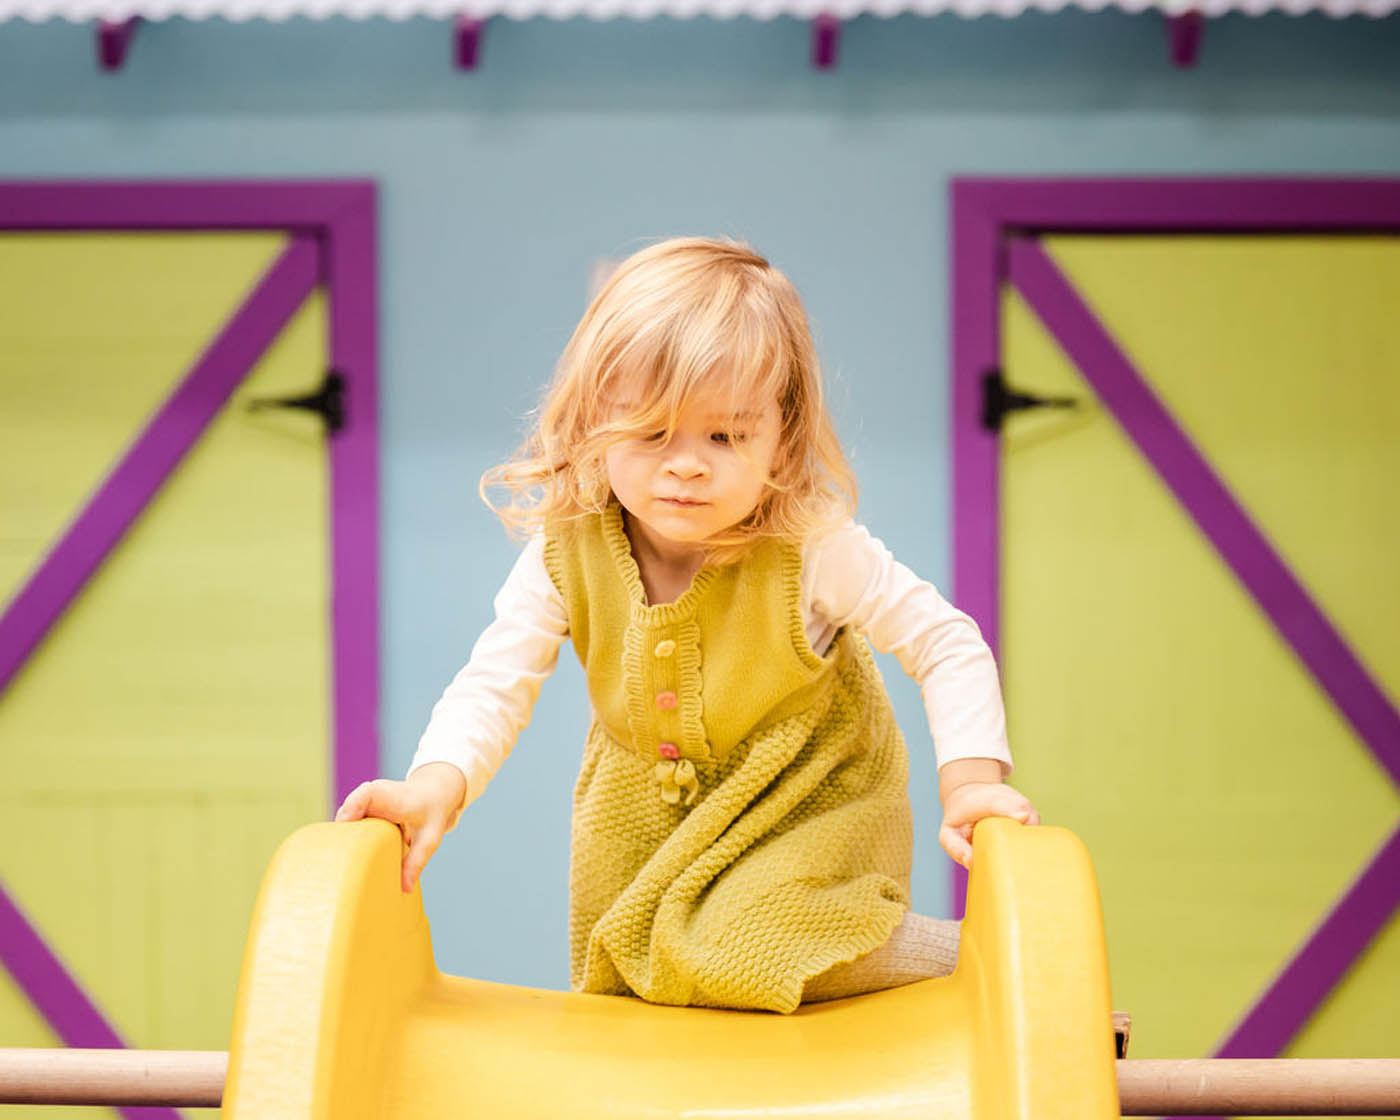 A toddler playing on a yellow slide at Romp n' Roll's classes for 3 year olds.